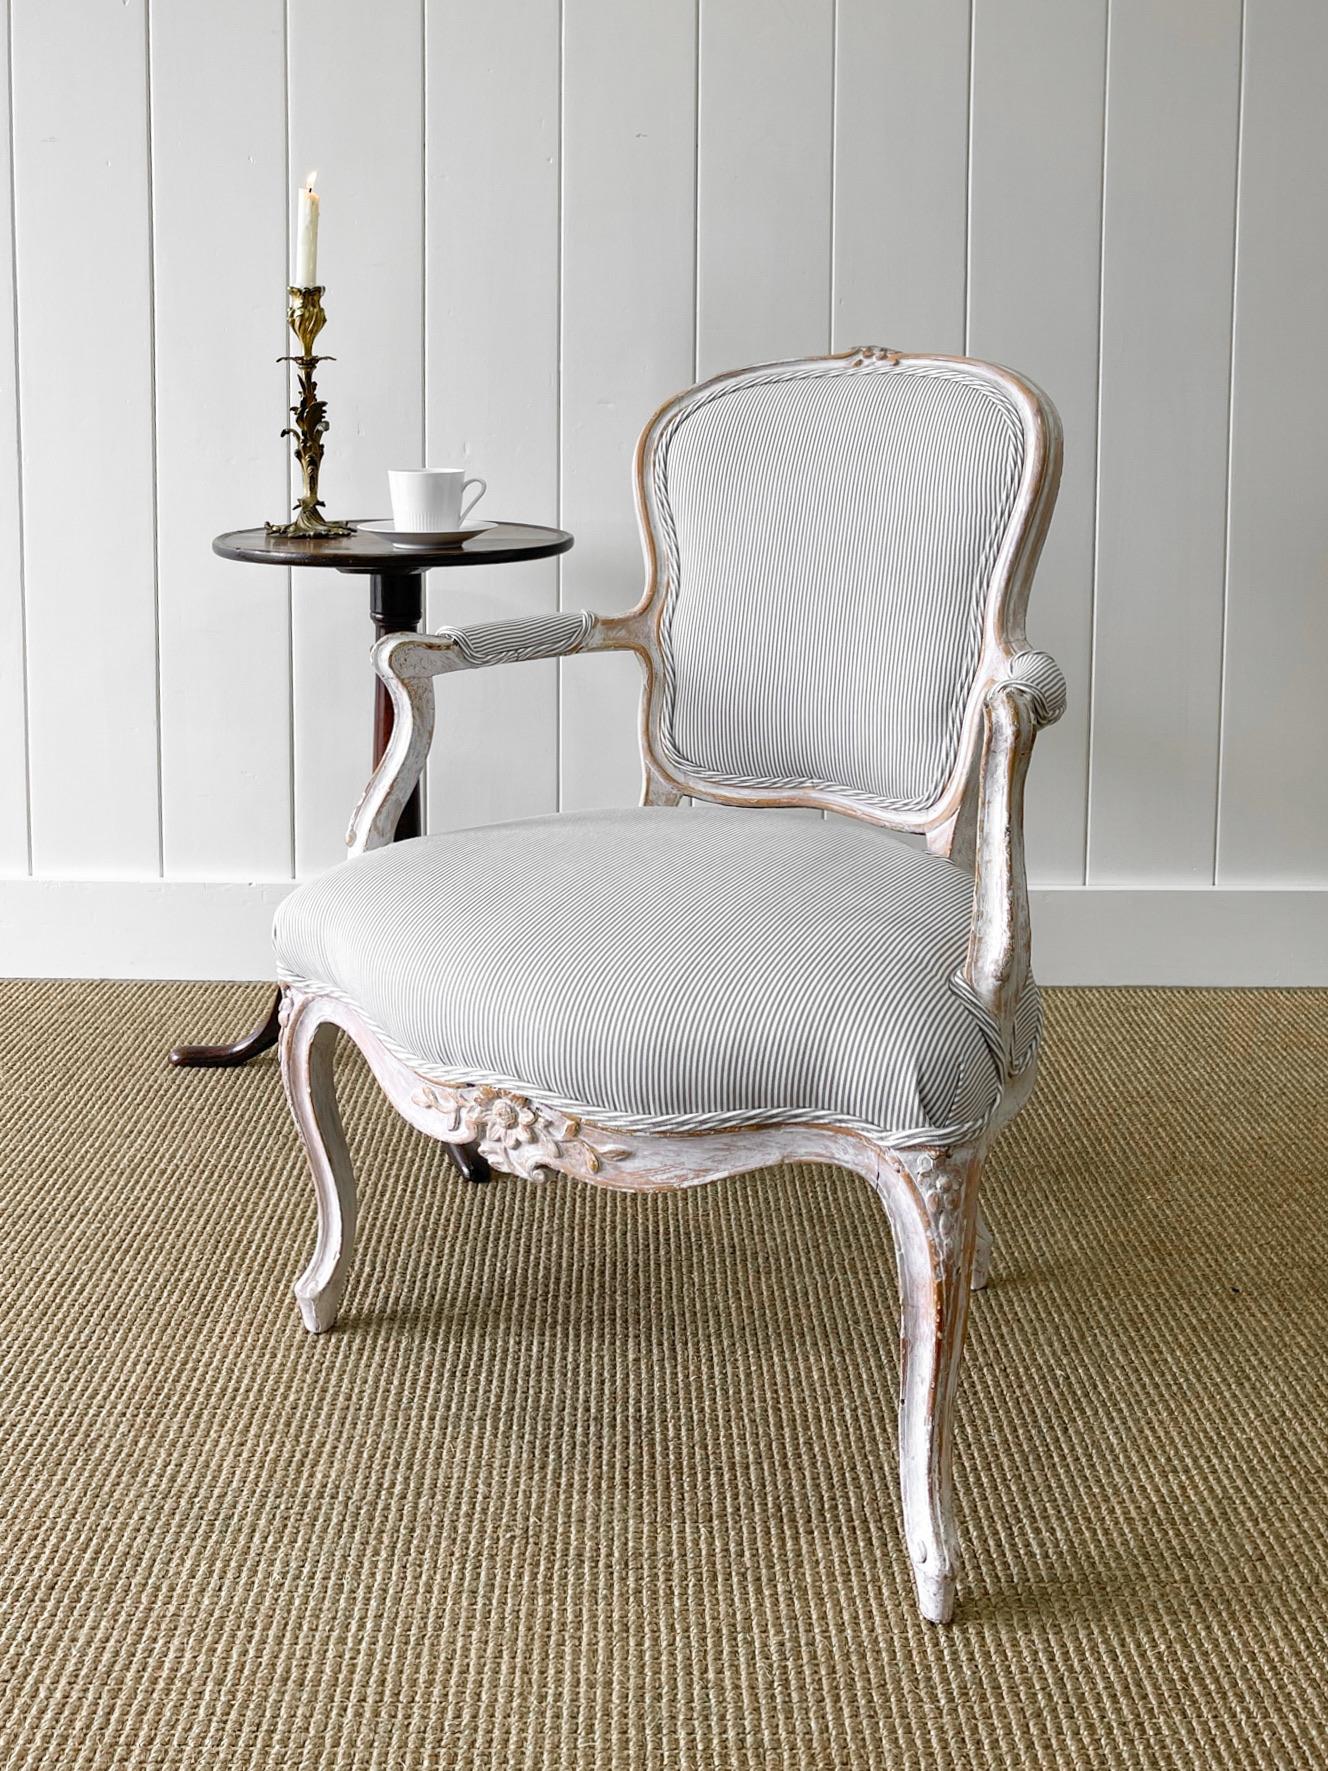 A stunning French 18th century fauteuil arm chair. Newly upholstered in a Kravet ticking 100% linen fabric. A very good patina on this chair! Excellent old white paint with hints of original gold gilding. Exquisite carving. The silhouette is